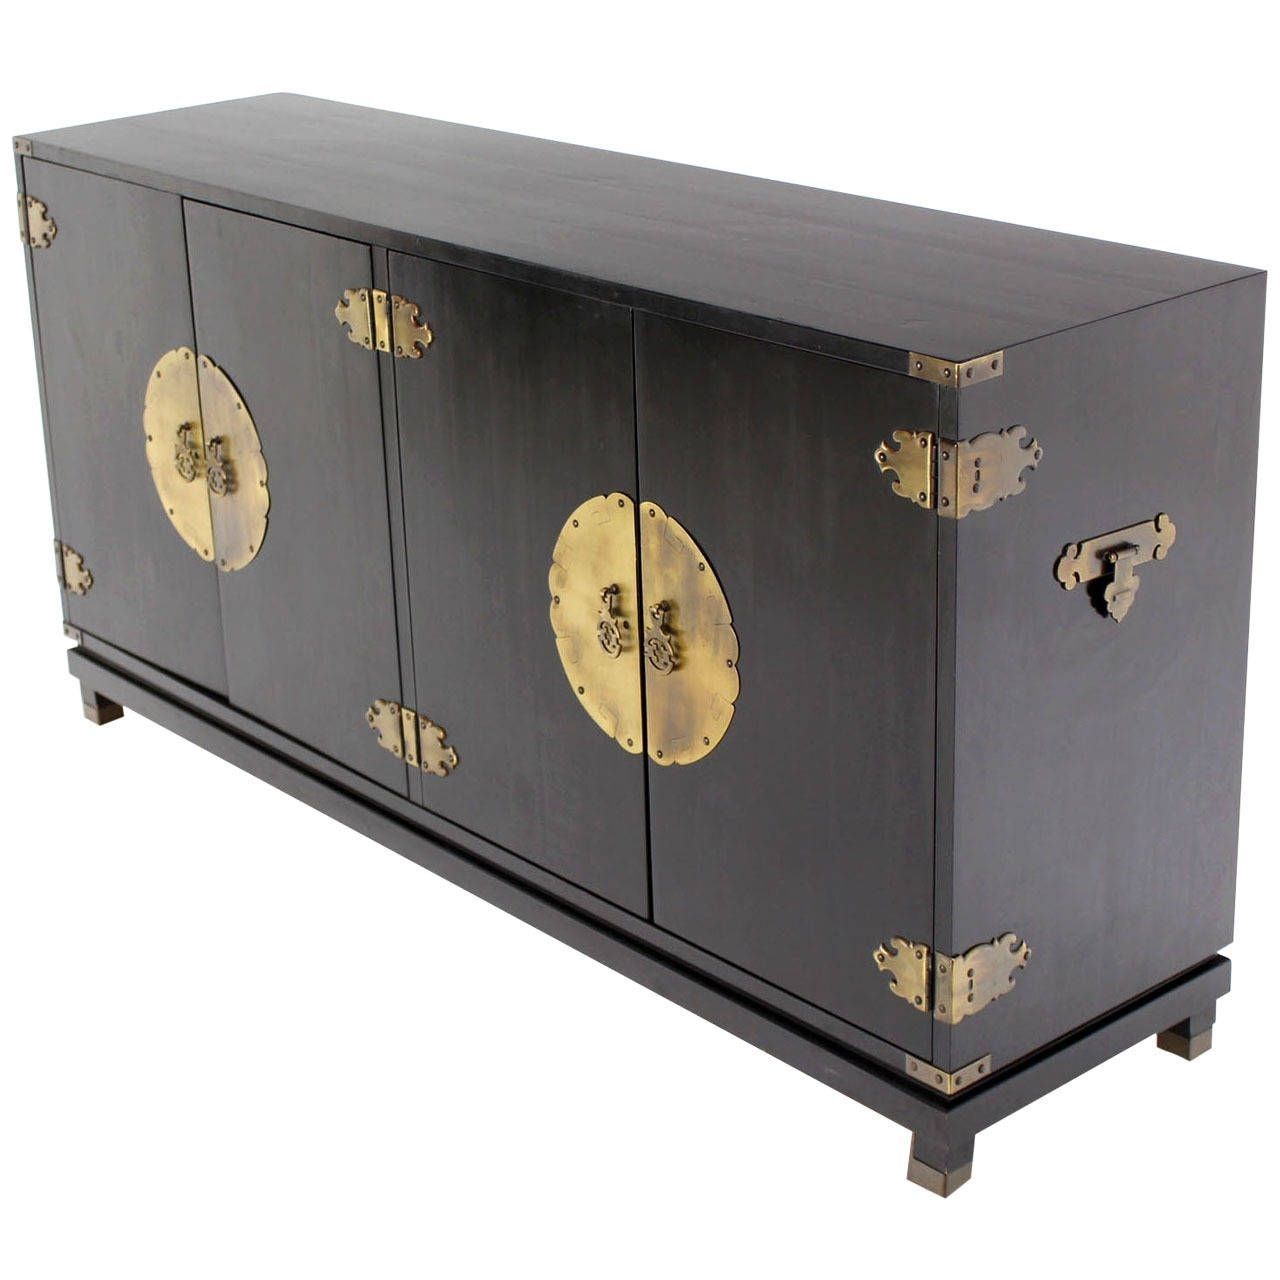 Black Lacquer Oriental Mid Century Modern Sideboard Or Credenza With Newest Starburst 3 Door Sideboards (View 18 of 20)